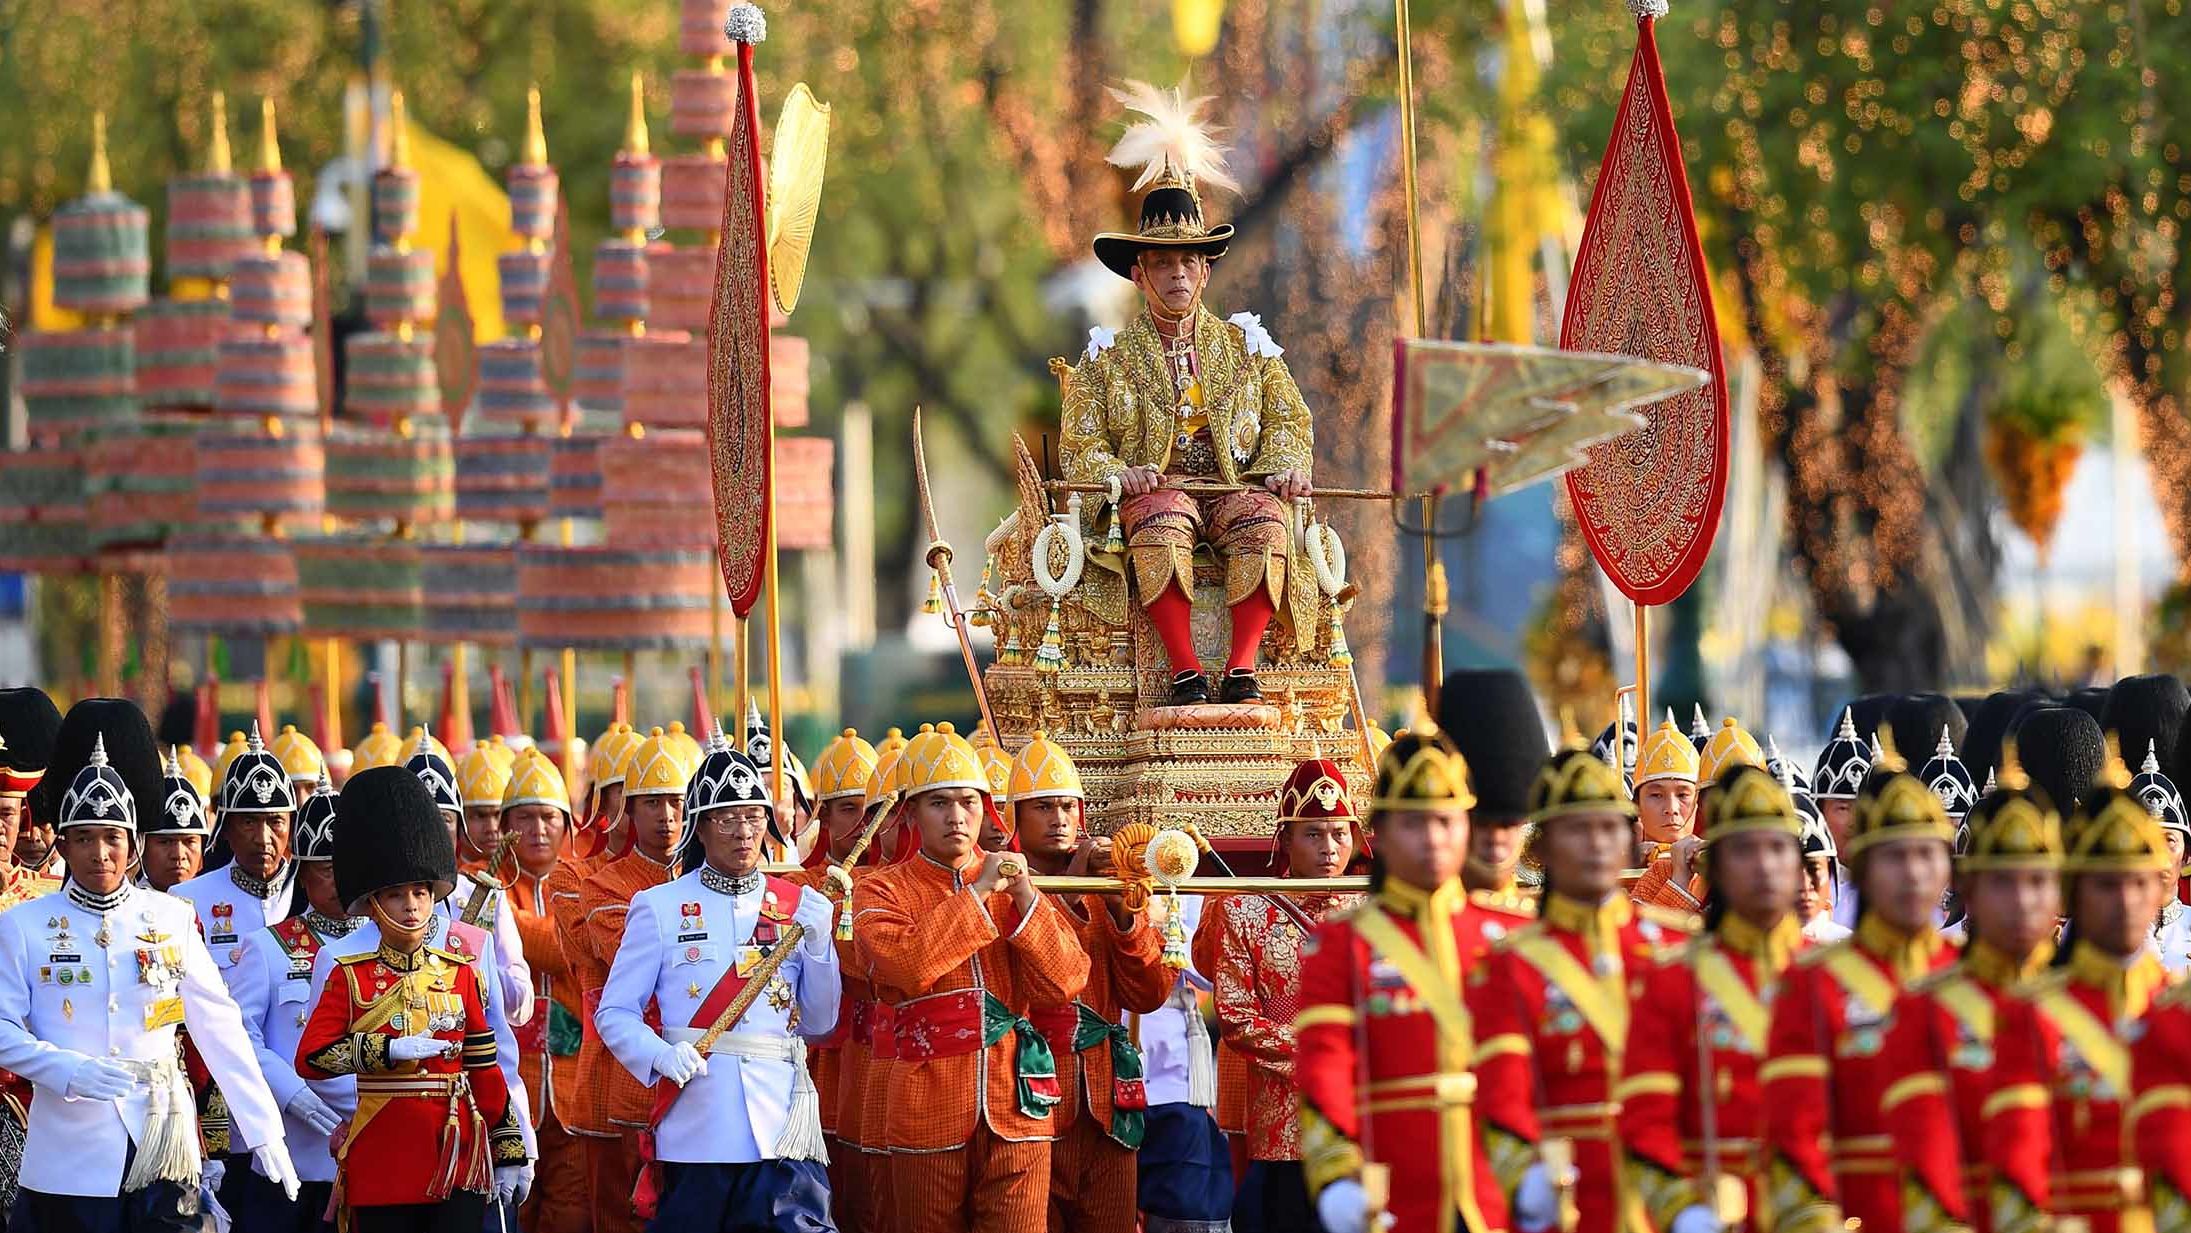 Thailand's King Maha Vajiralongkorn is carried in a golden palanquin during a coronation procession in Bangkok on Sunday, May 5.